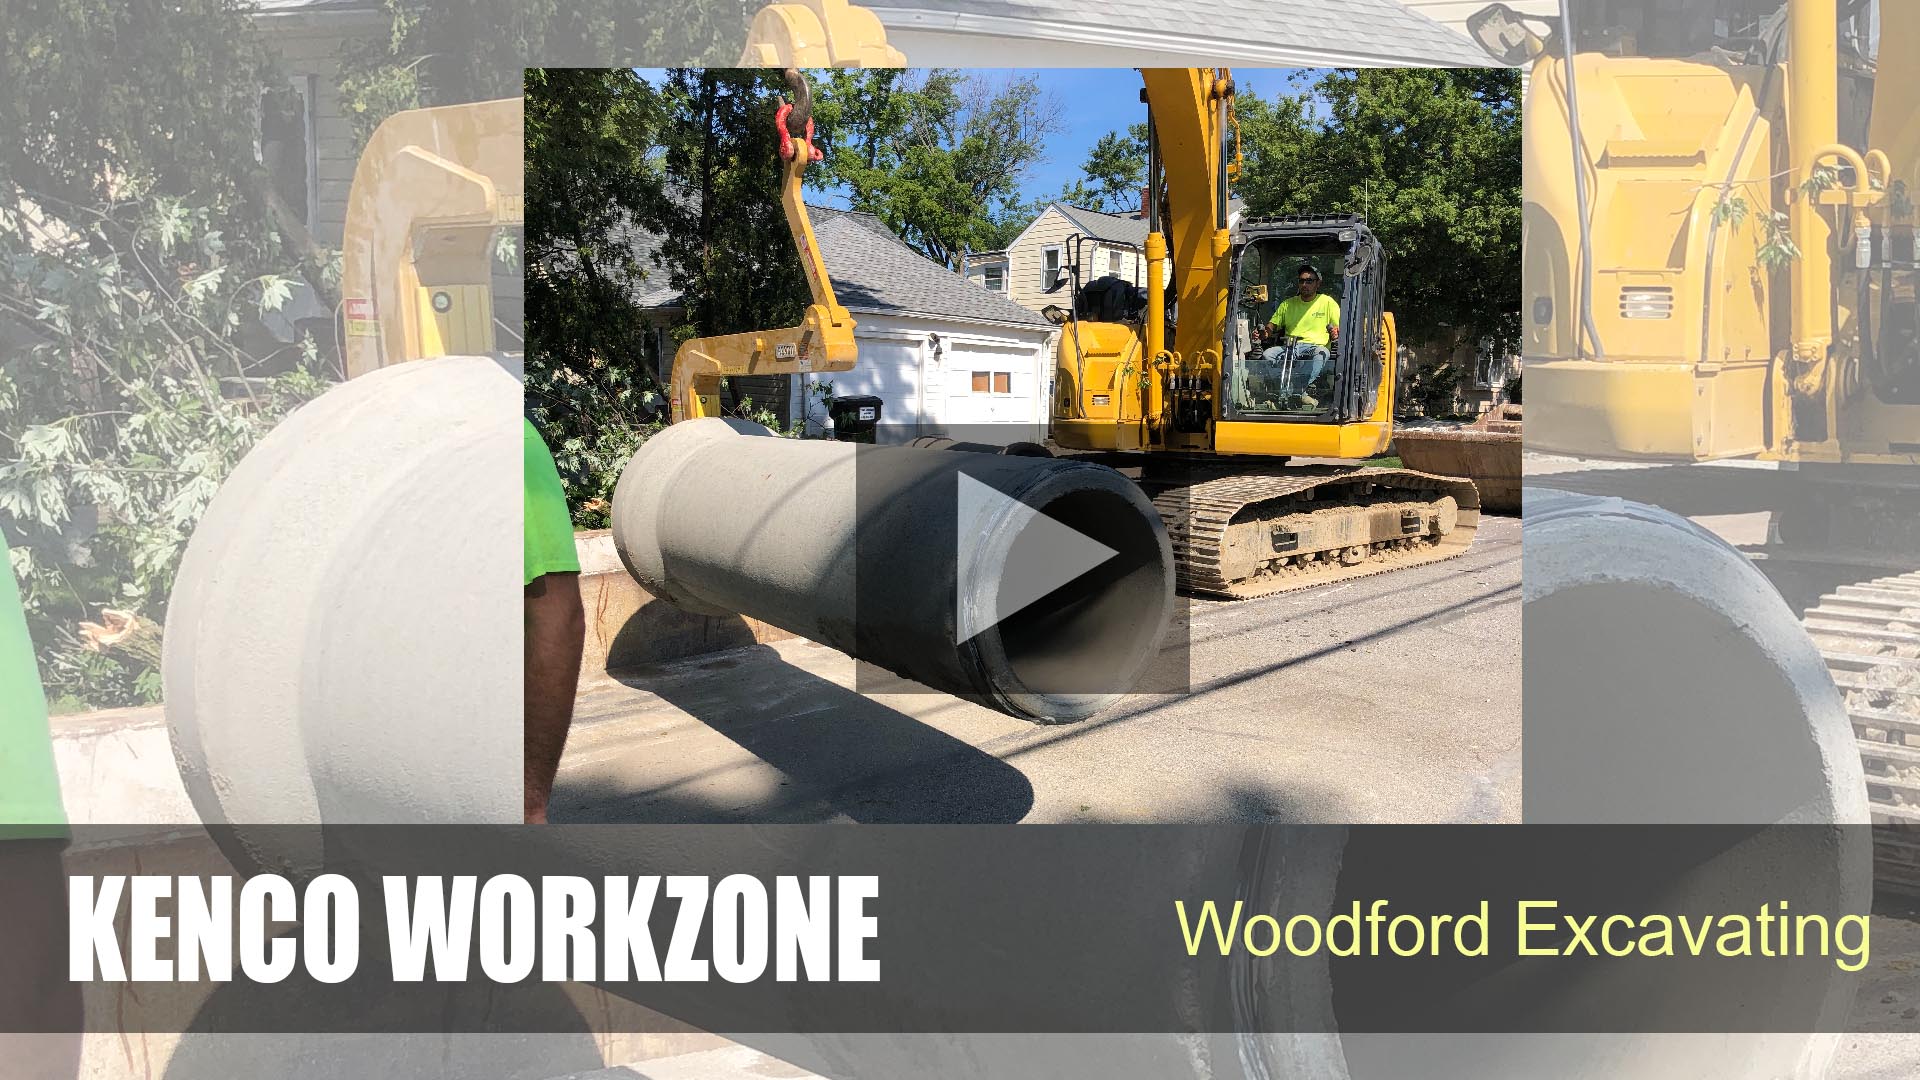 Woodford Excavating Video Placeholder